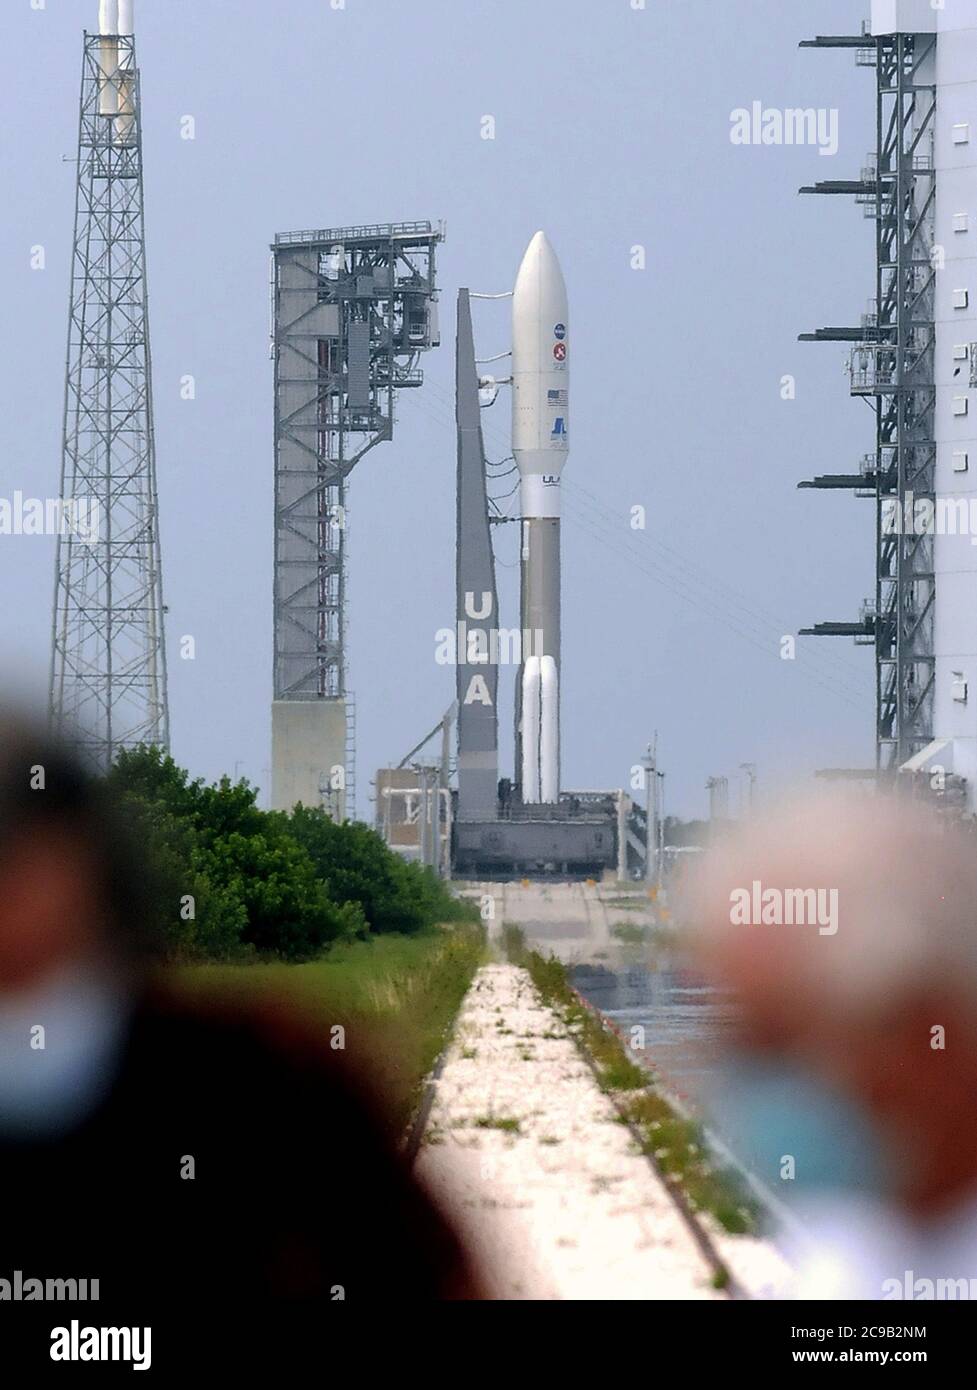 July 29, 2020 - Cape Canaveral, Florida, United States - Members of the media wearing protective face masks walk near an Atlas V rocket with NASA's Perseverance rover as it stands ready for launch tomorrow morning at pad 41 at Cape Canaveral Air Force Station on July 29, 2020 in Cape Canaveral, Florida. As the key component of the Mars 2020 mission, Perseverance is scheduled to land on the Red Planet in February 2021 where it will seek signs of ancient life and collect rock and soil samples for possible return to Earth. (Paul Hennessy/Alamy Live News) Stock Photo